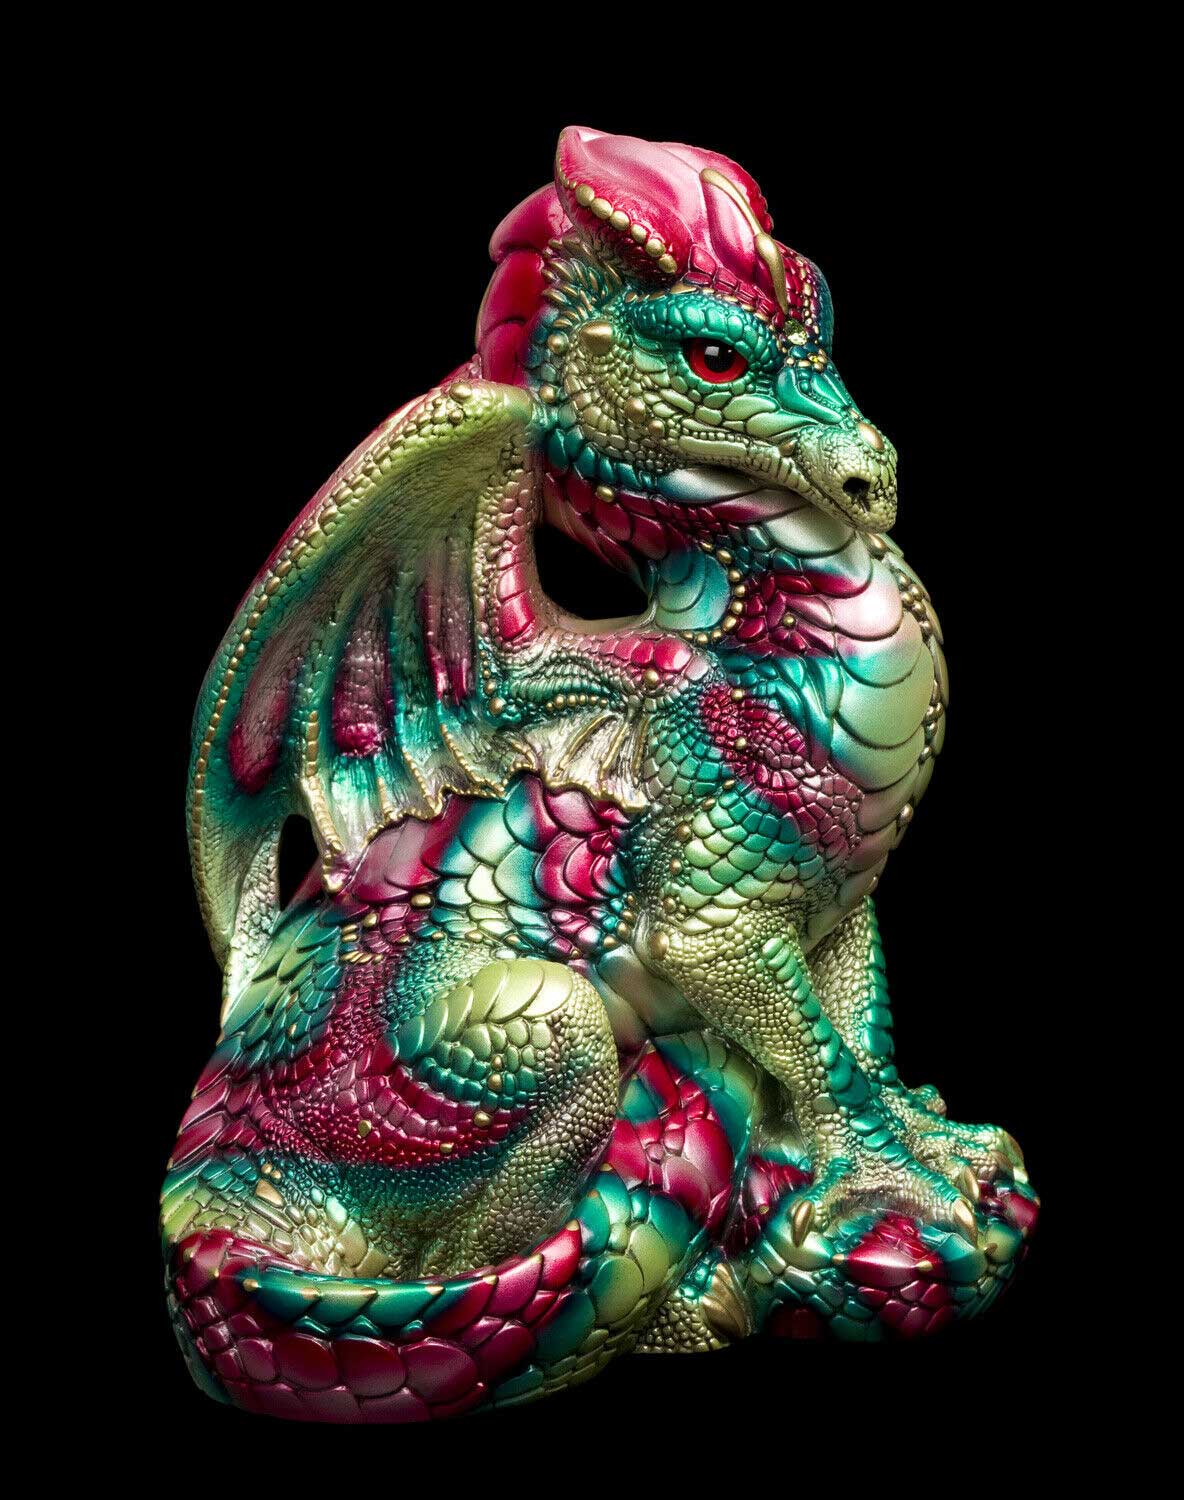 20220114-Candy-Craze-Male-Dragon-Test-Paint-1-by-Gina